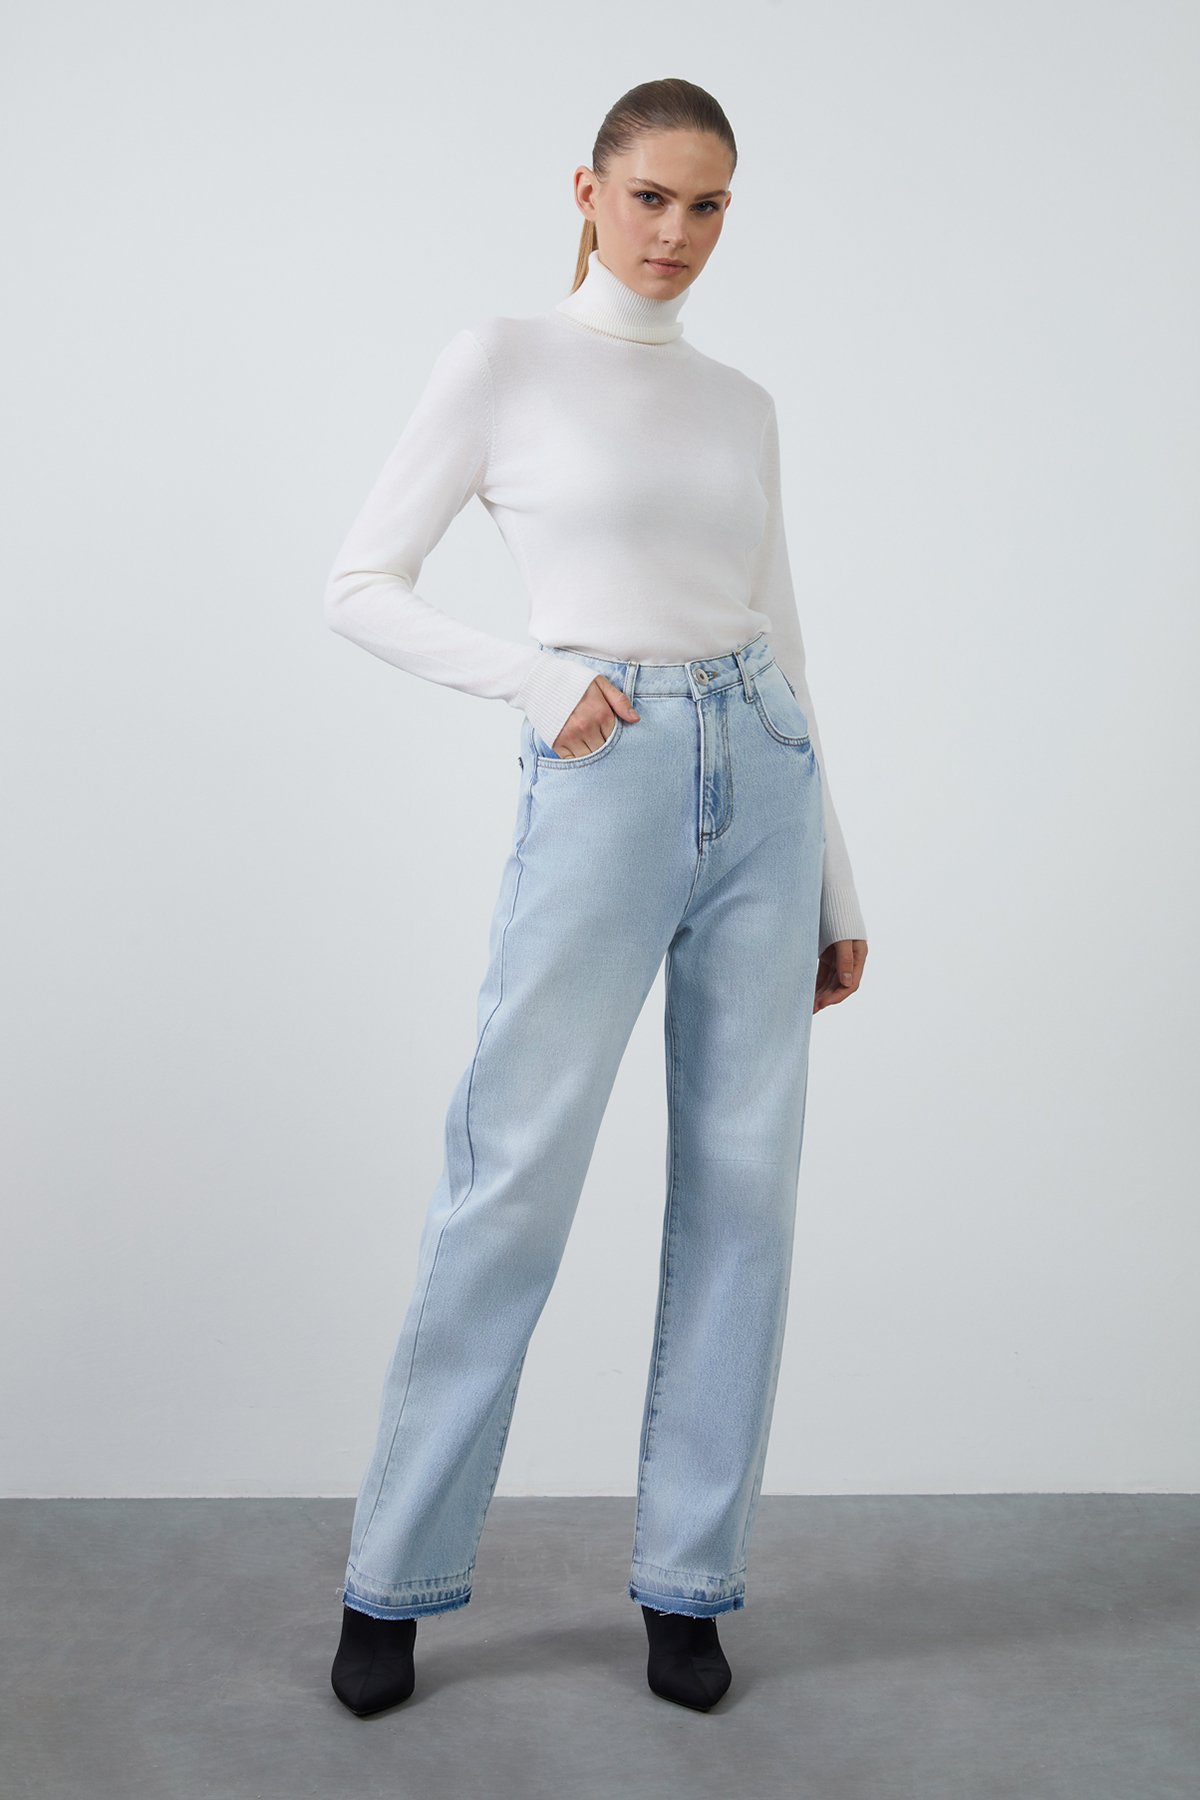 Basic Tube Jeans with Accessory Buckle Details - Gizia